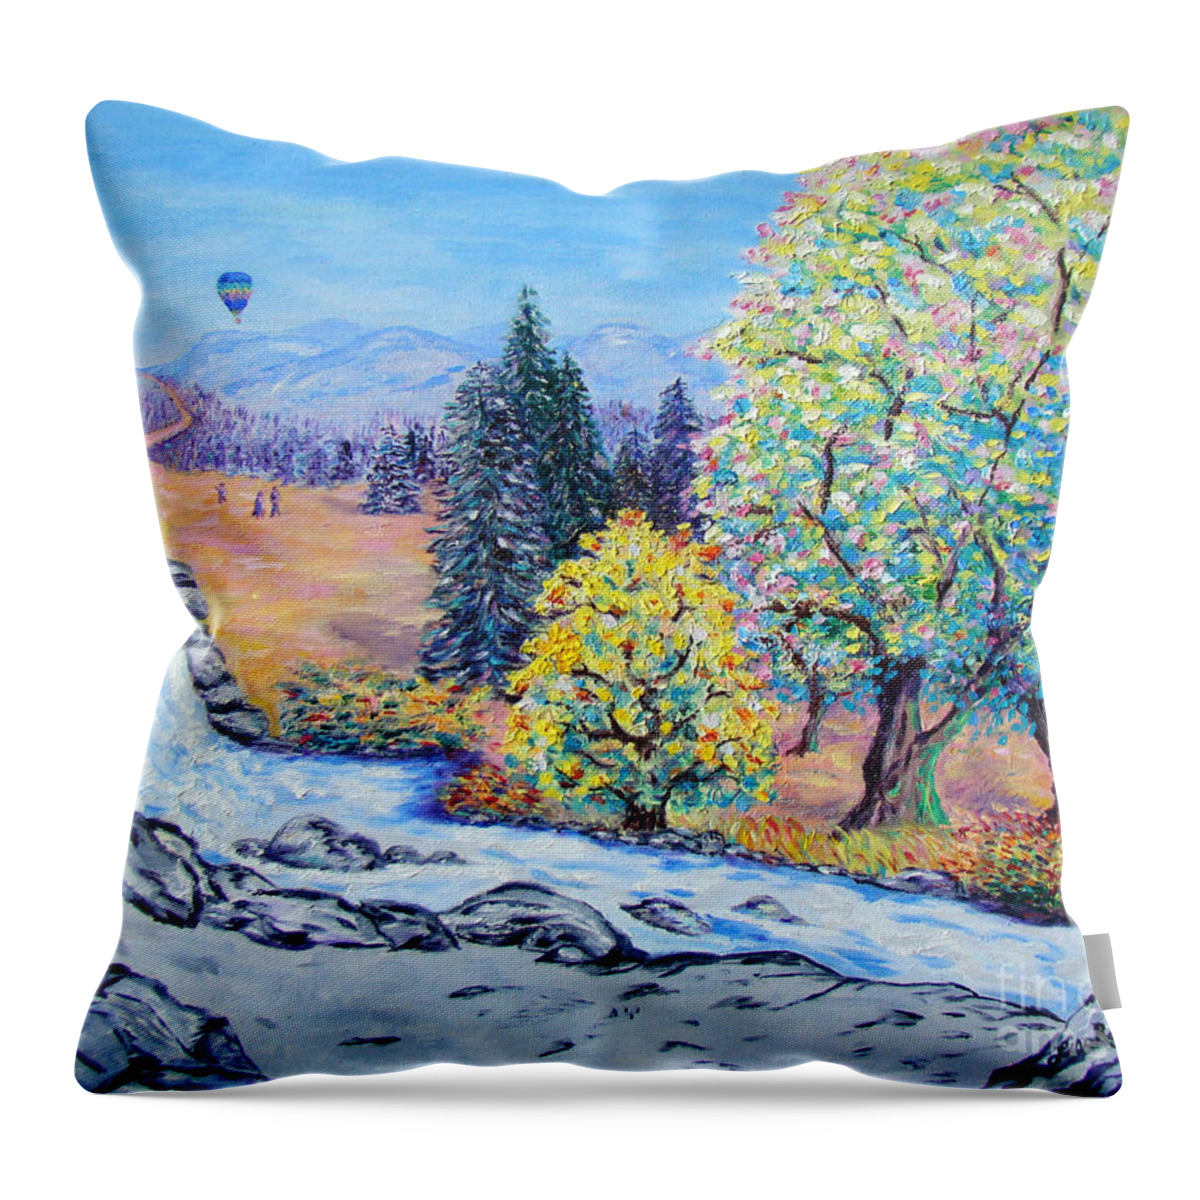 Hot Air Baloon Throw Pillow featuring the painting On The Lookout by Lisa Rose Musselwhite